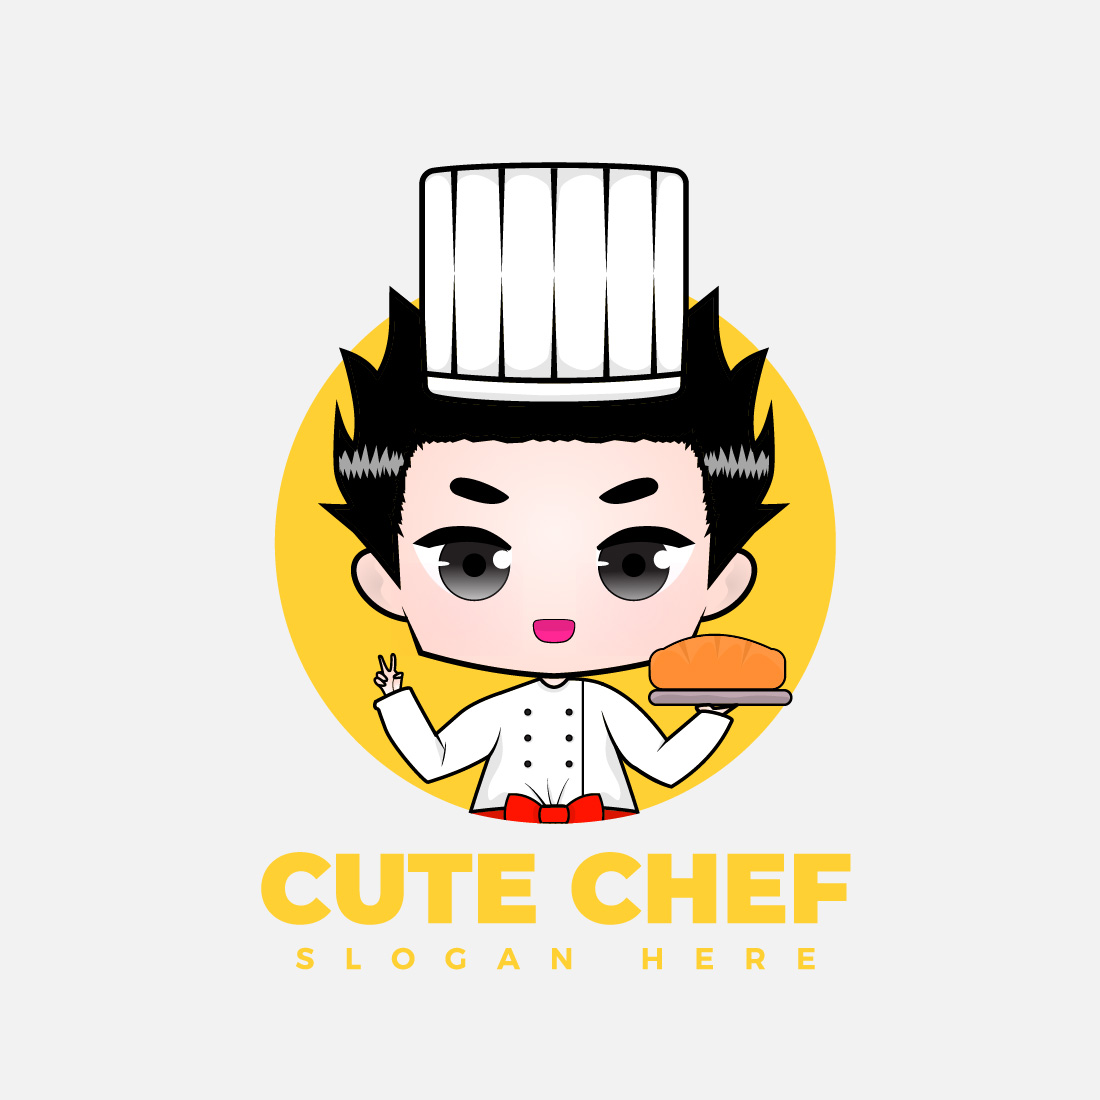 Cute Chef Character Logo Collection cover image.